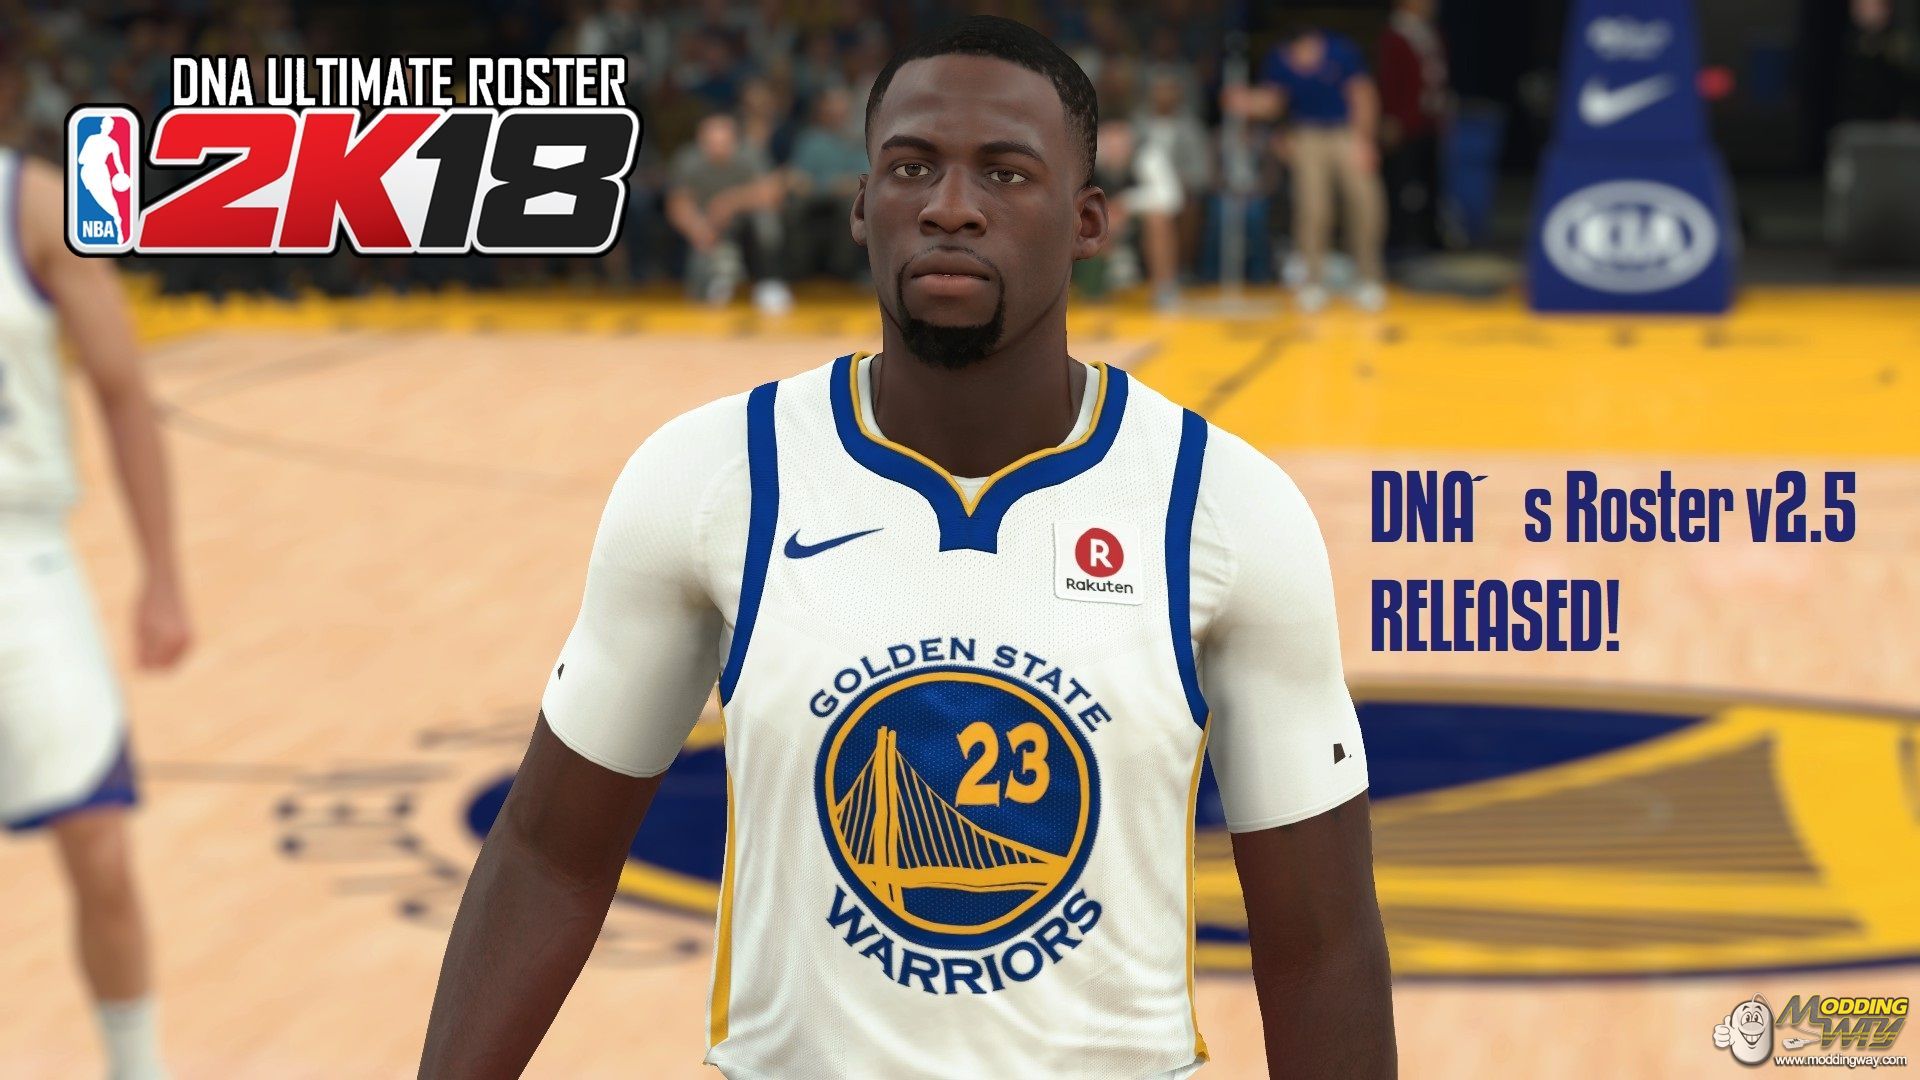 Nba 2k18 roster update download xbox one